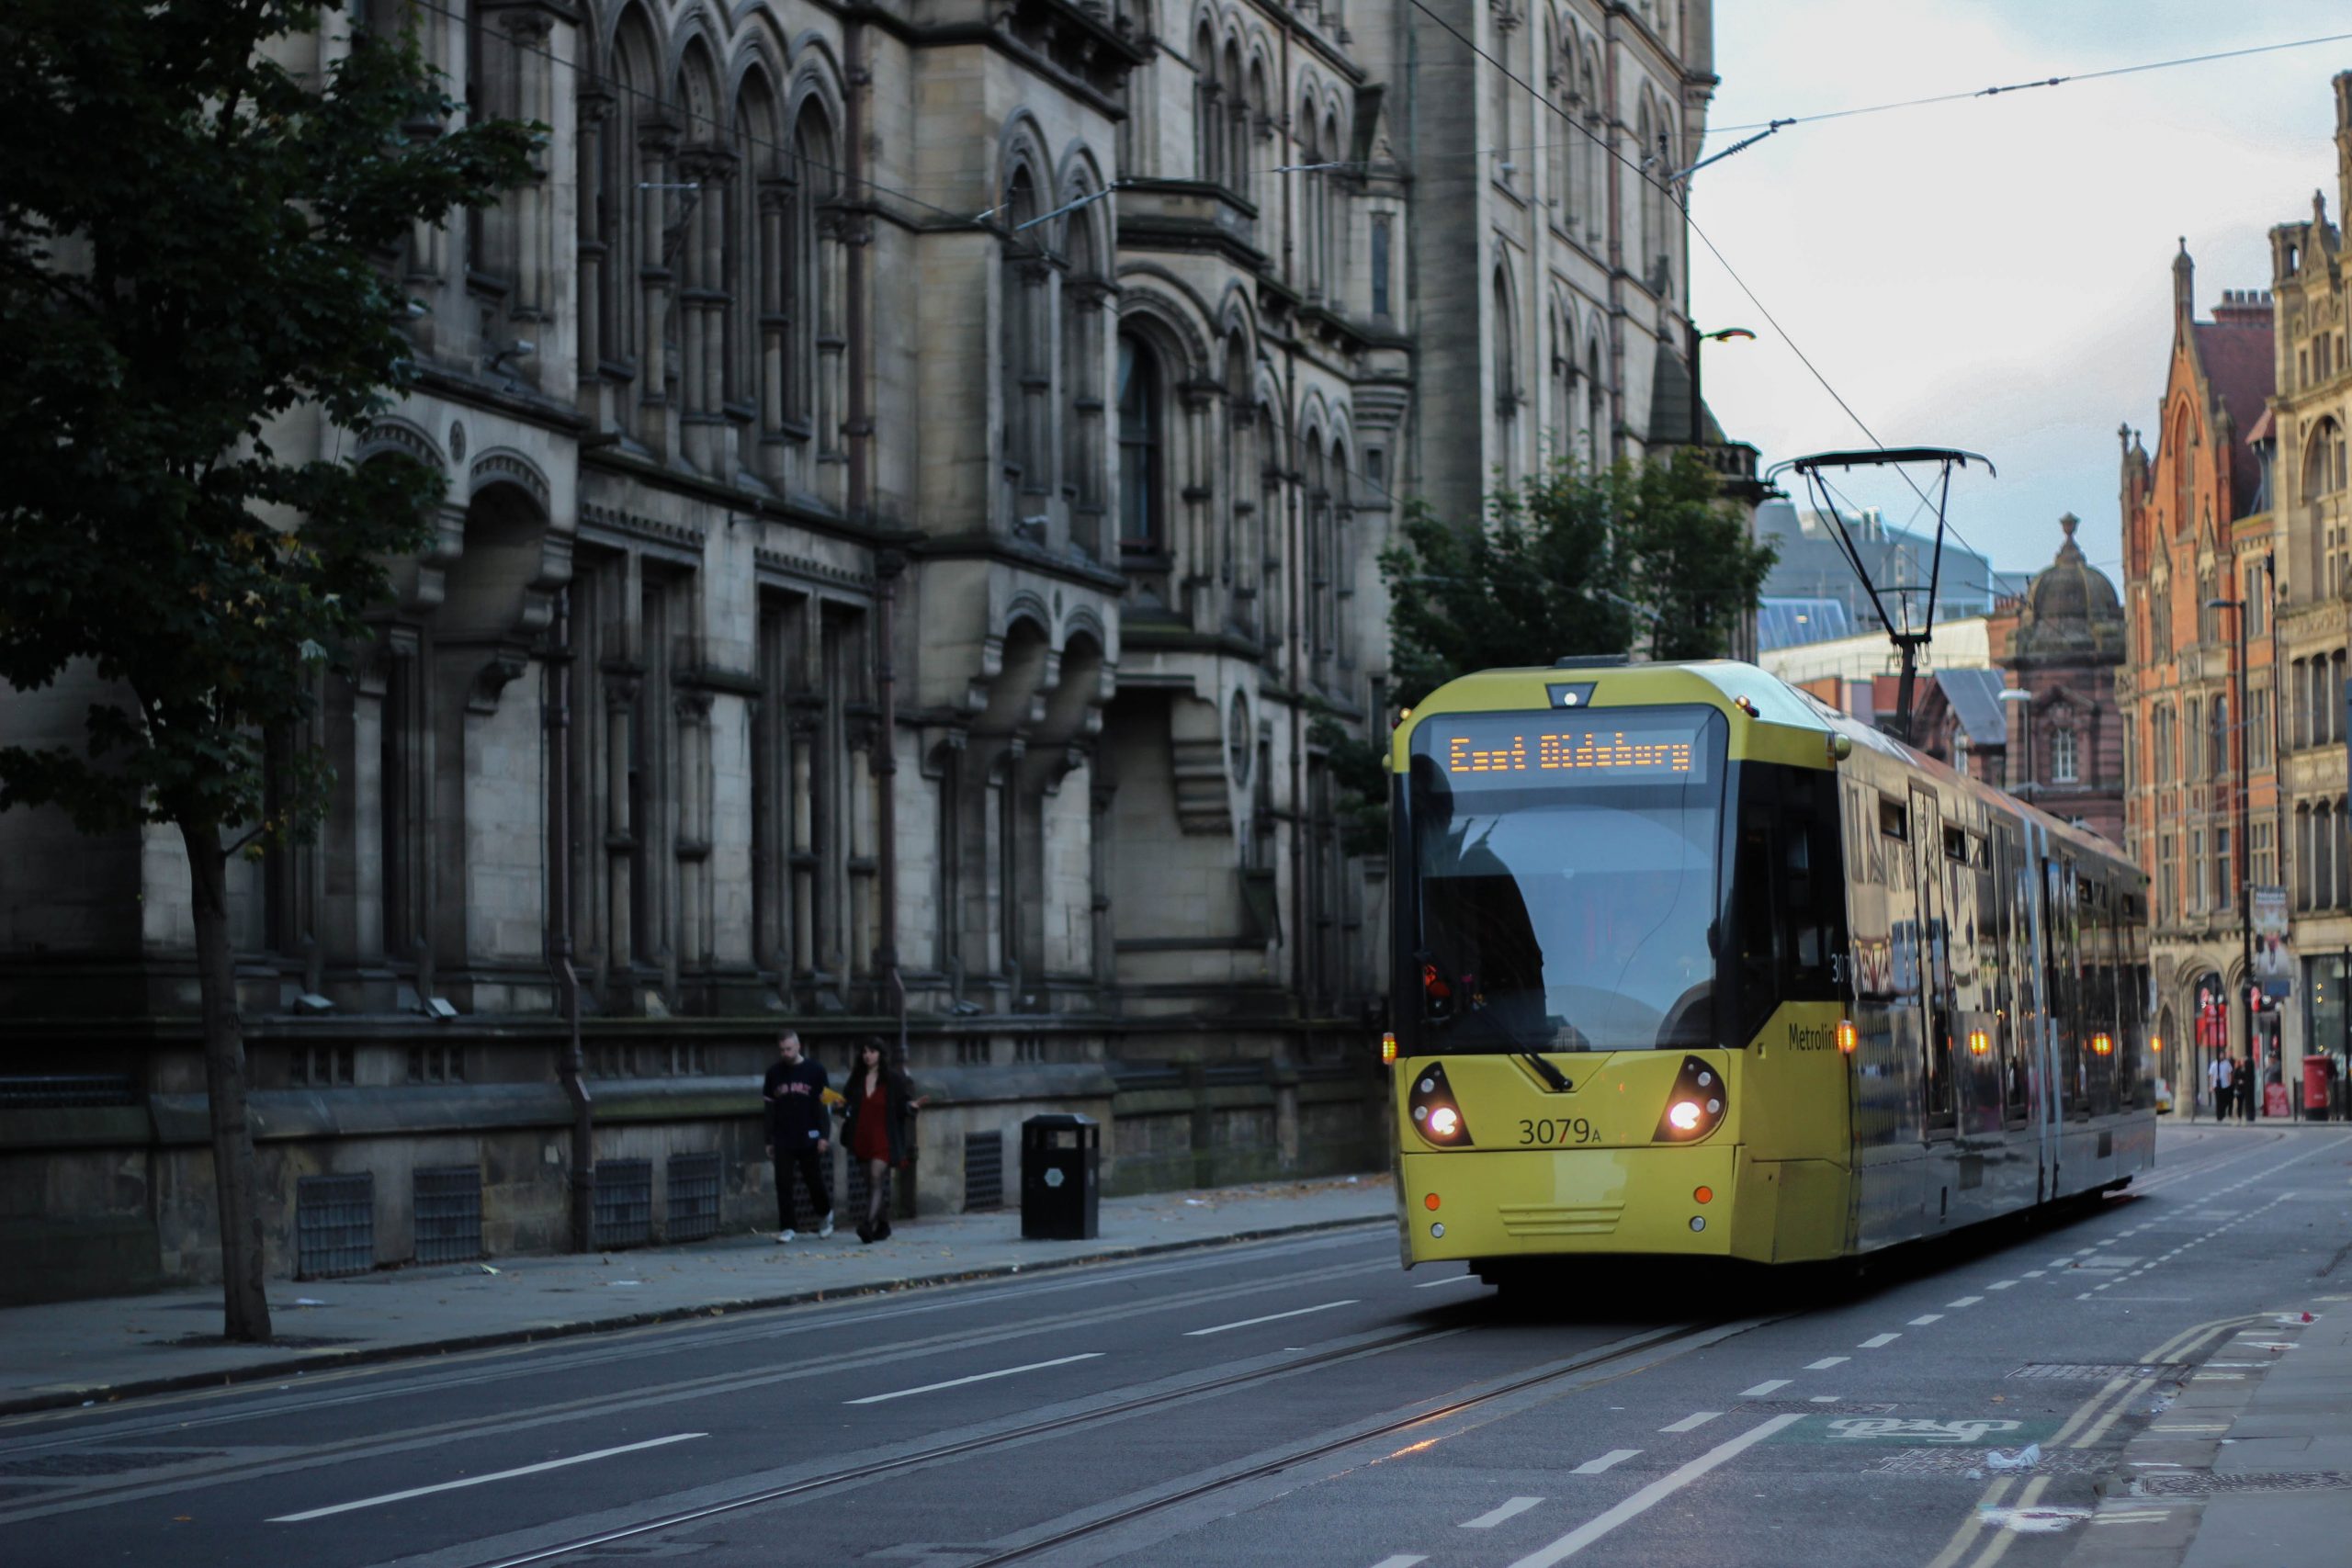 Tram going to East Didsbury from City centre